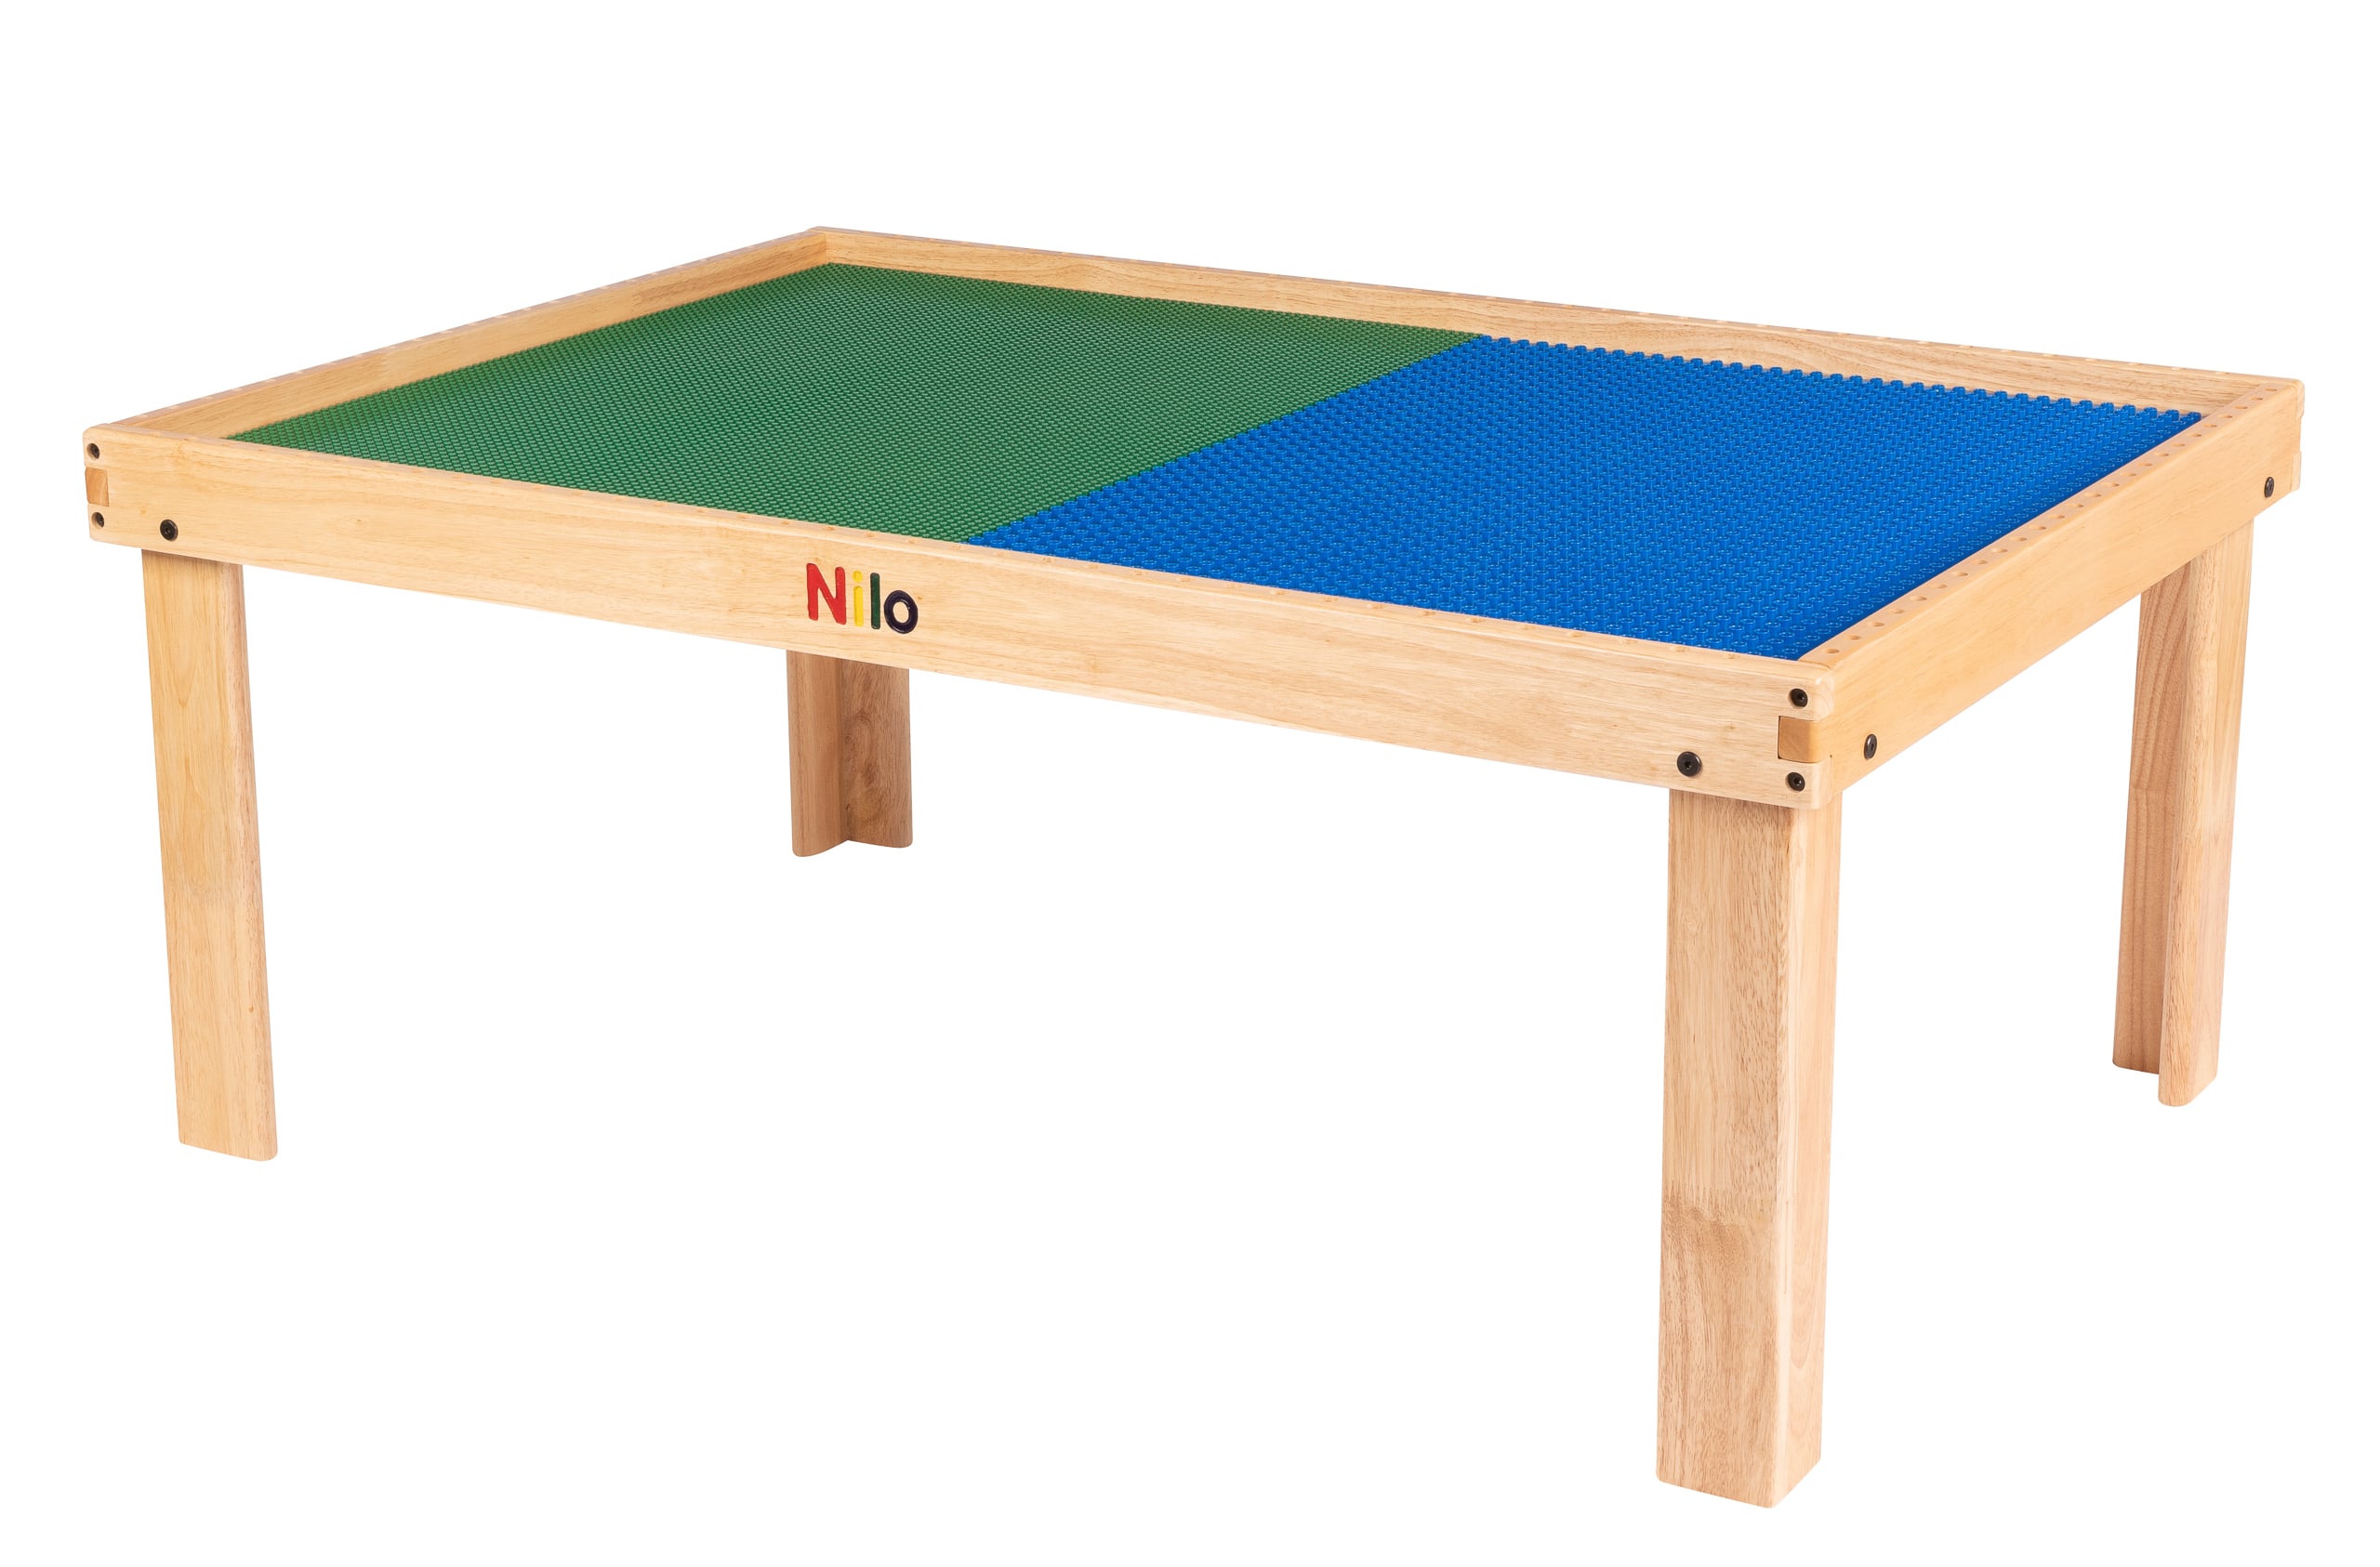 large childrens play table shown with blue and green nilo lego duplo compatible baseplate mats